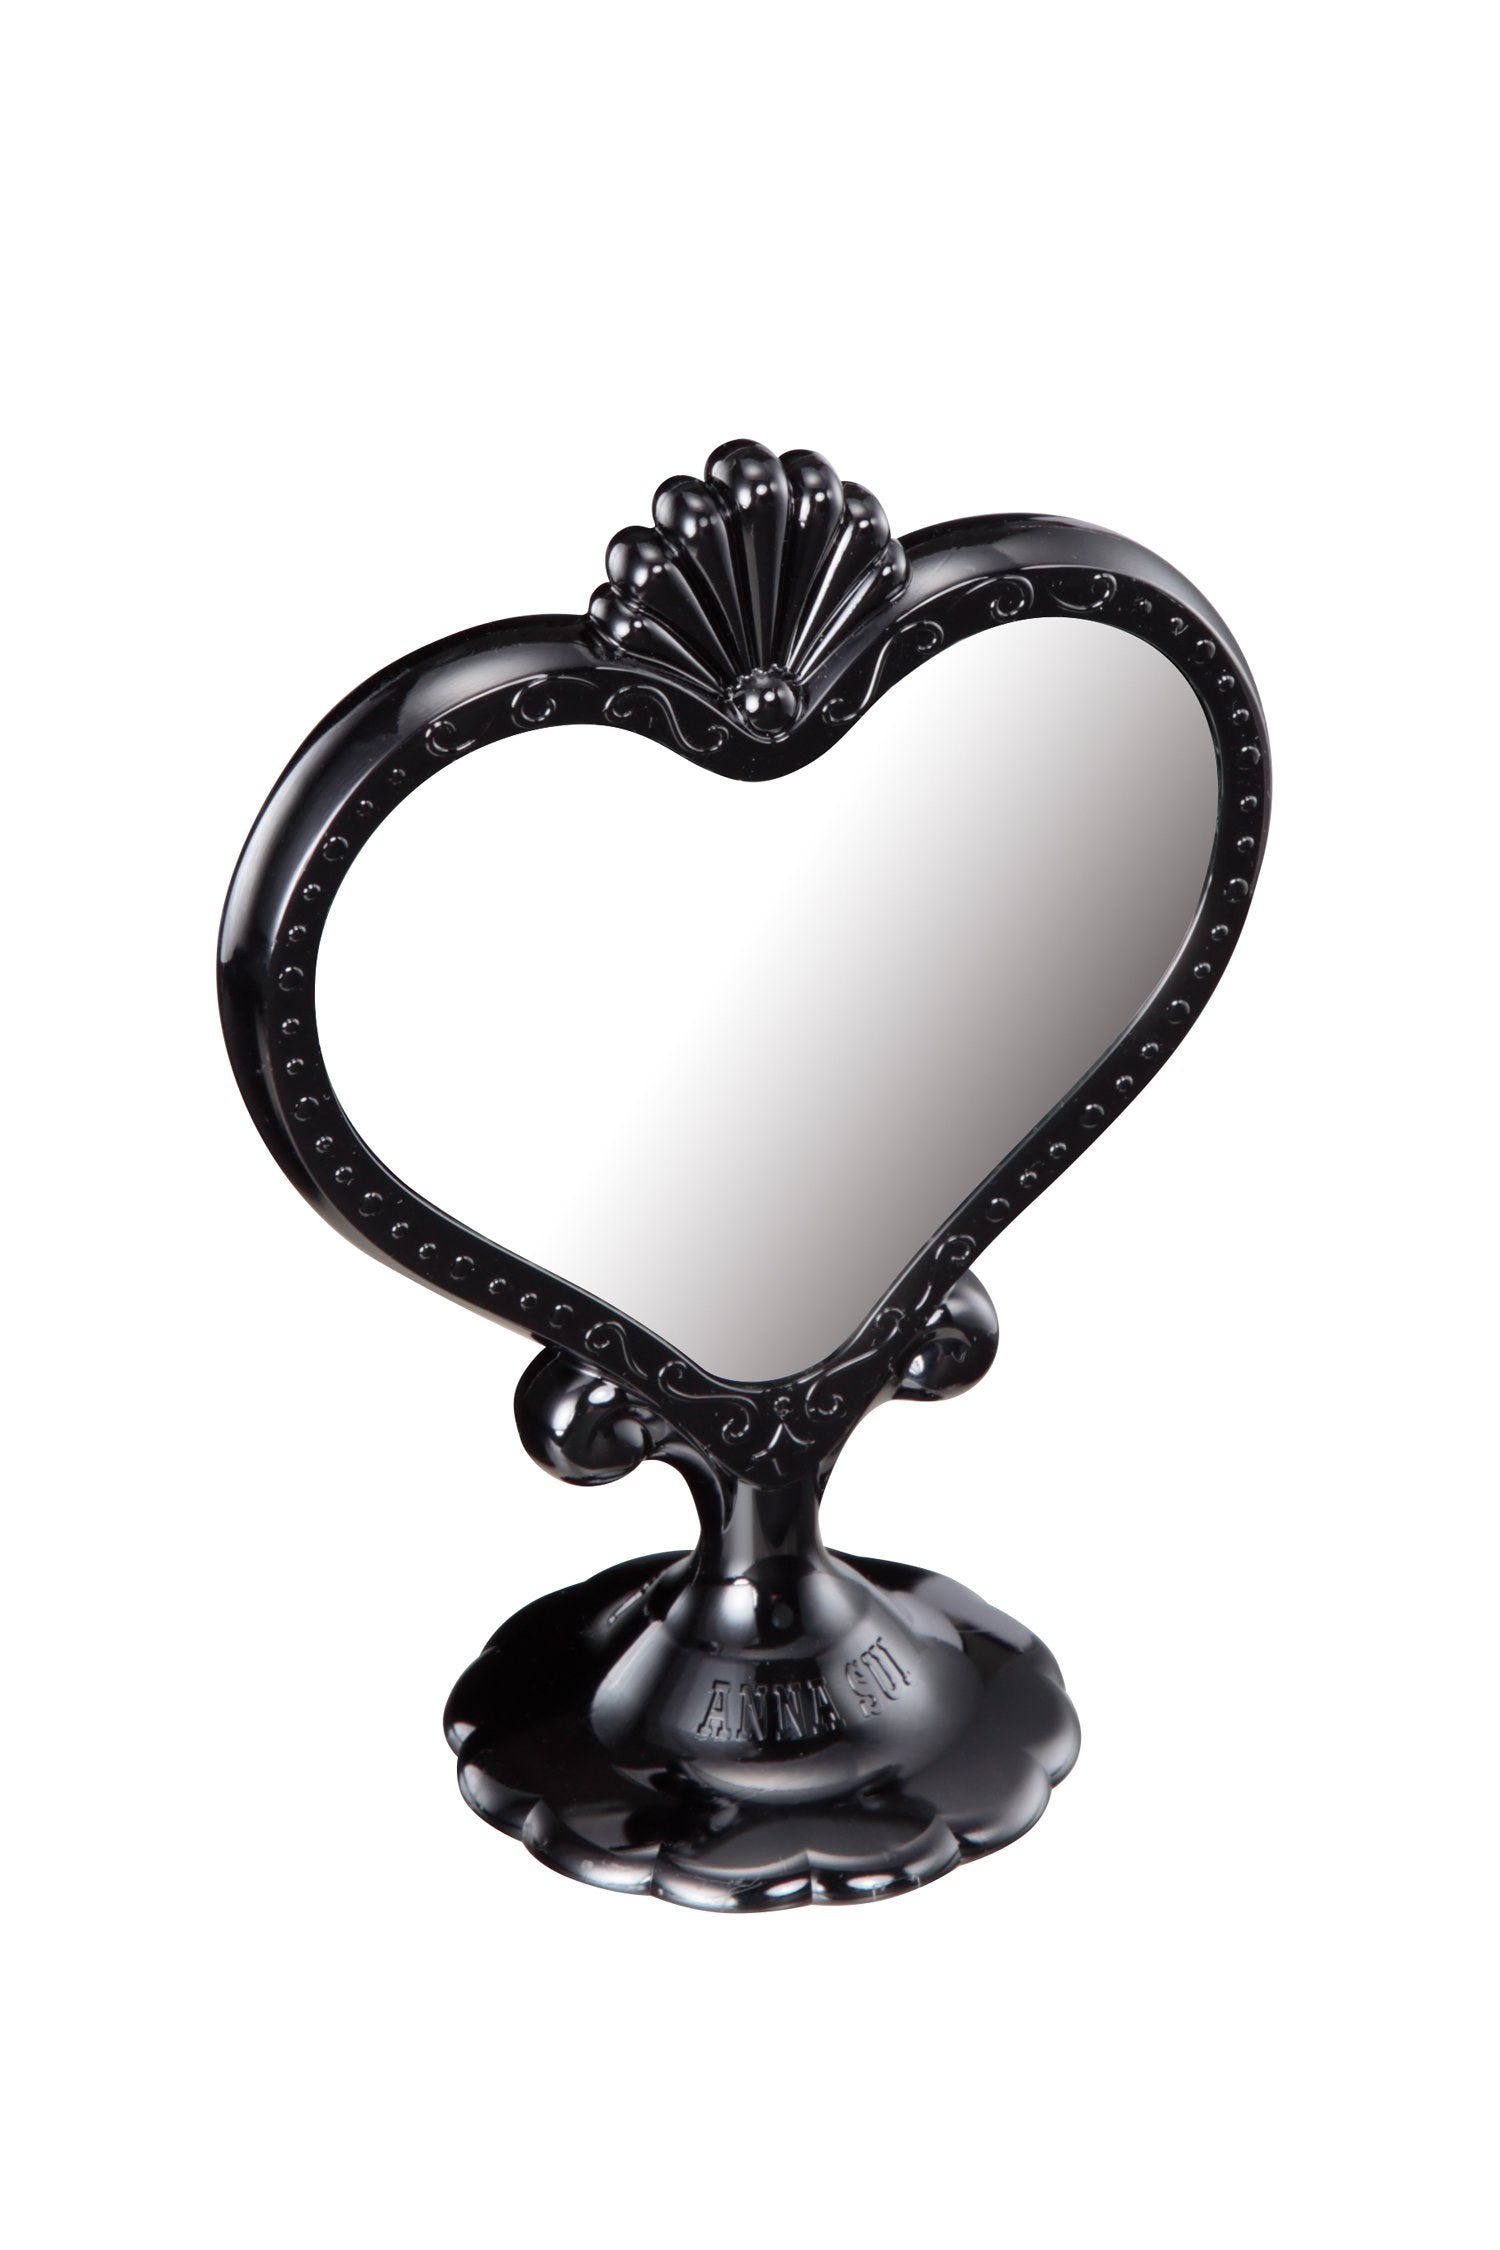 Black Stand Mirror in a heart-shaped mirror, a seashell on top on a stand with Anna branding